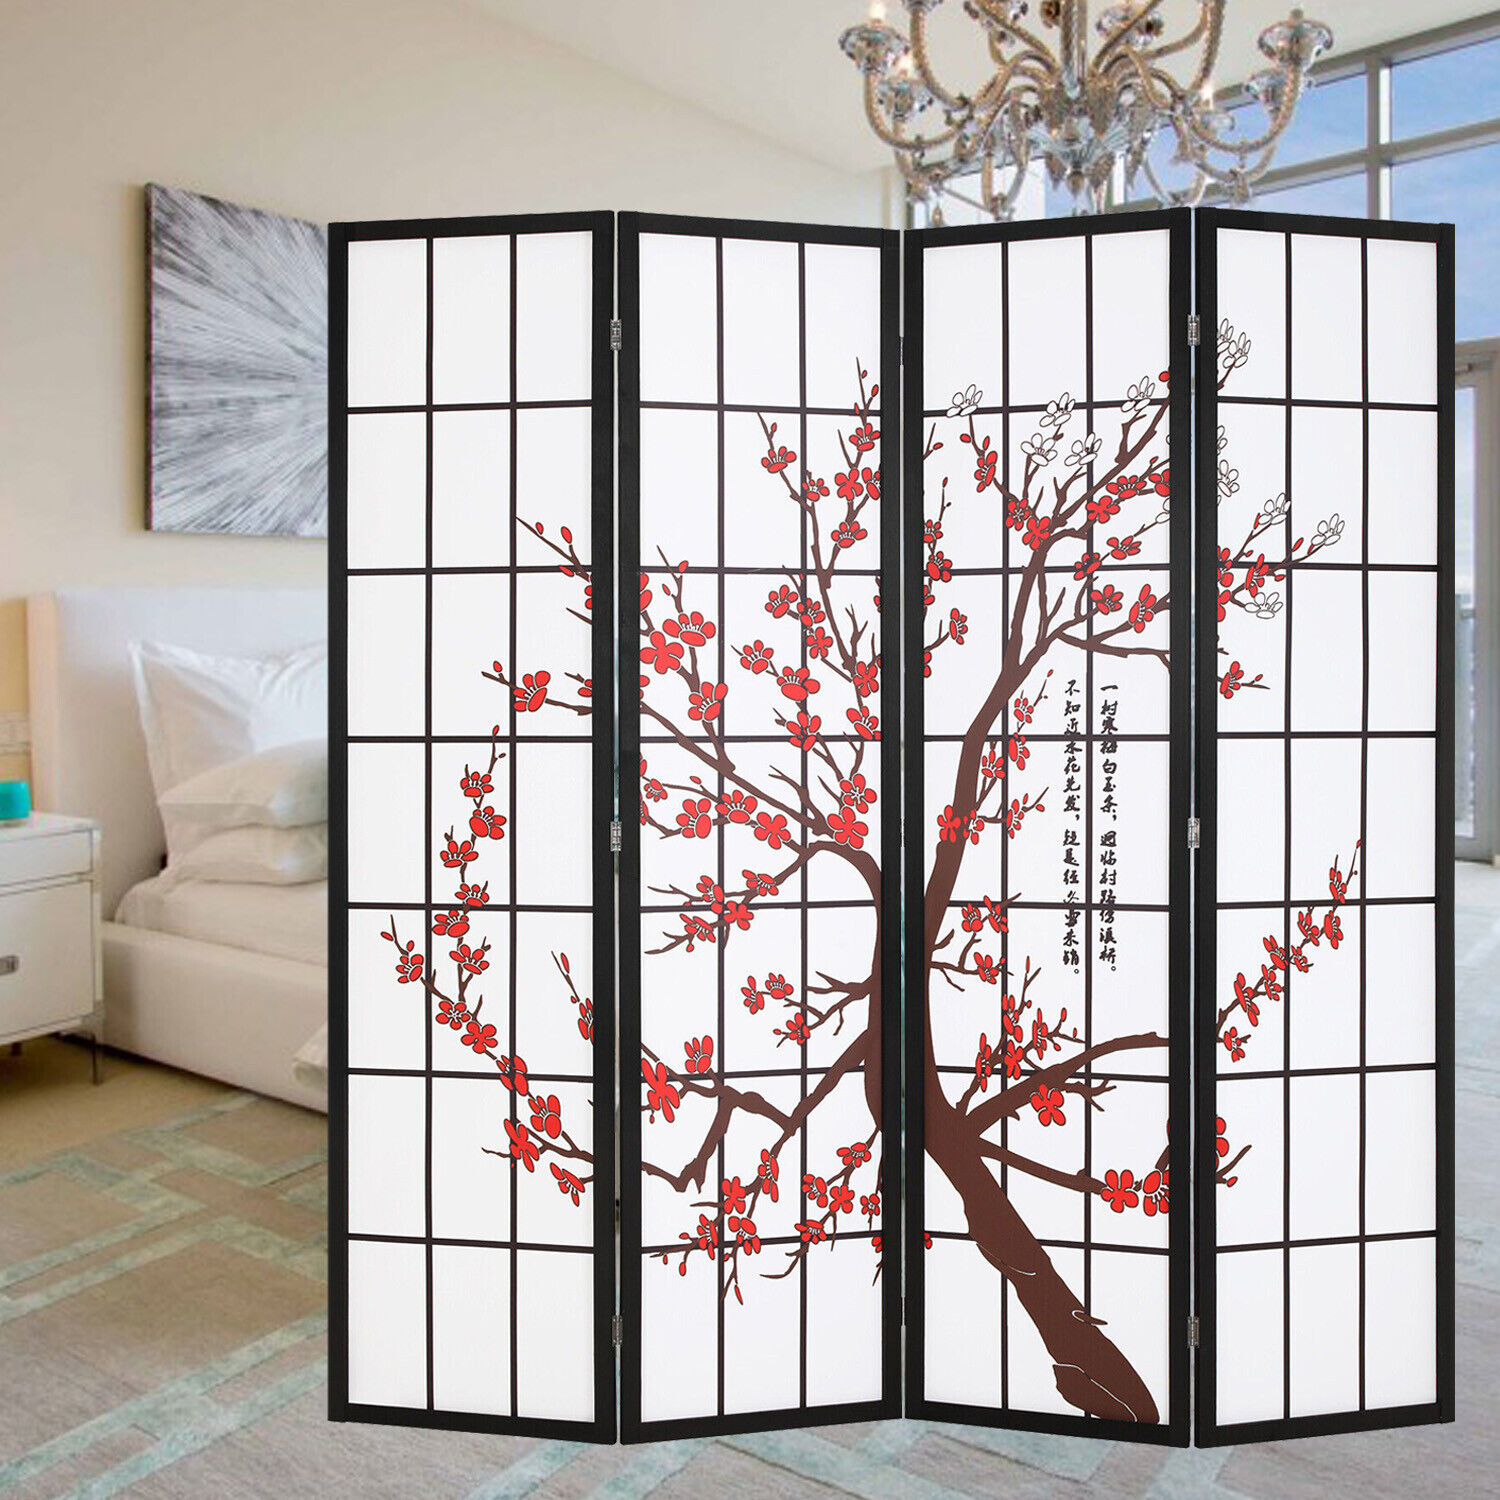 4 Panel Room Divider Screen  Folding Room Divider Panel Privacy Wooden Screen